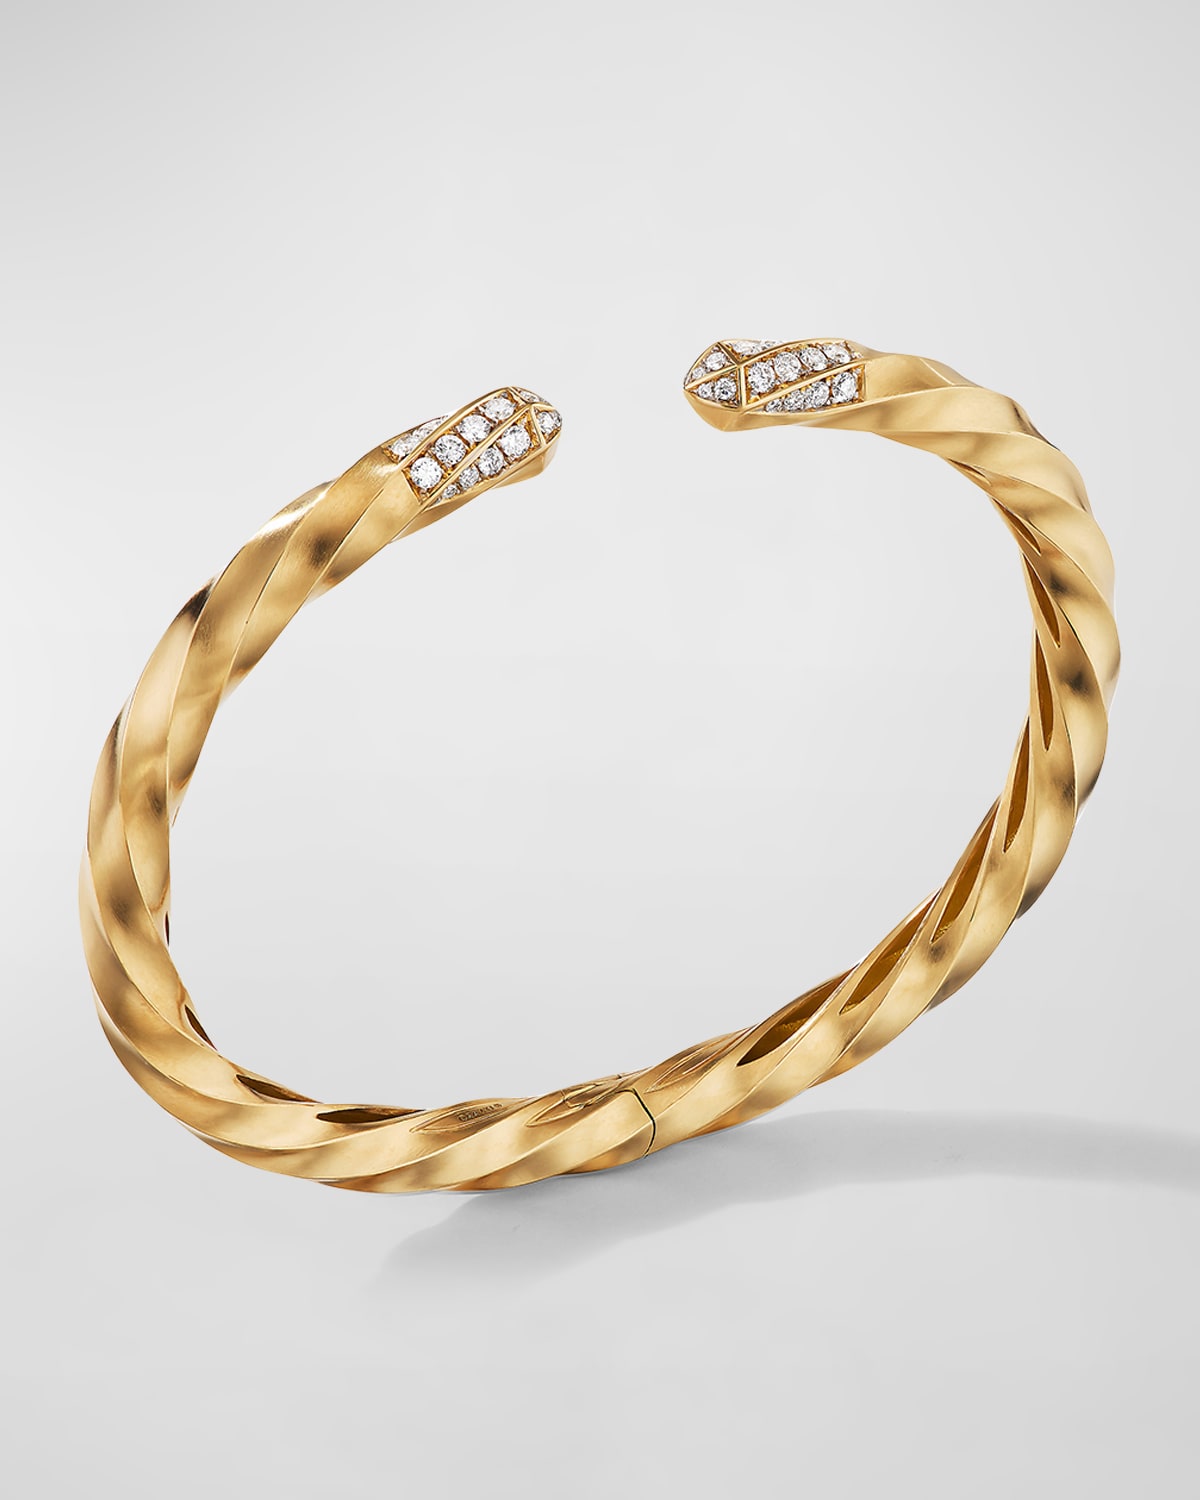 DAVID YURMAN CABLE EDGE OPEN BRACELET IN RECYCLED 18K GOLD WITH PAVE DIAMONDS